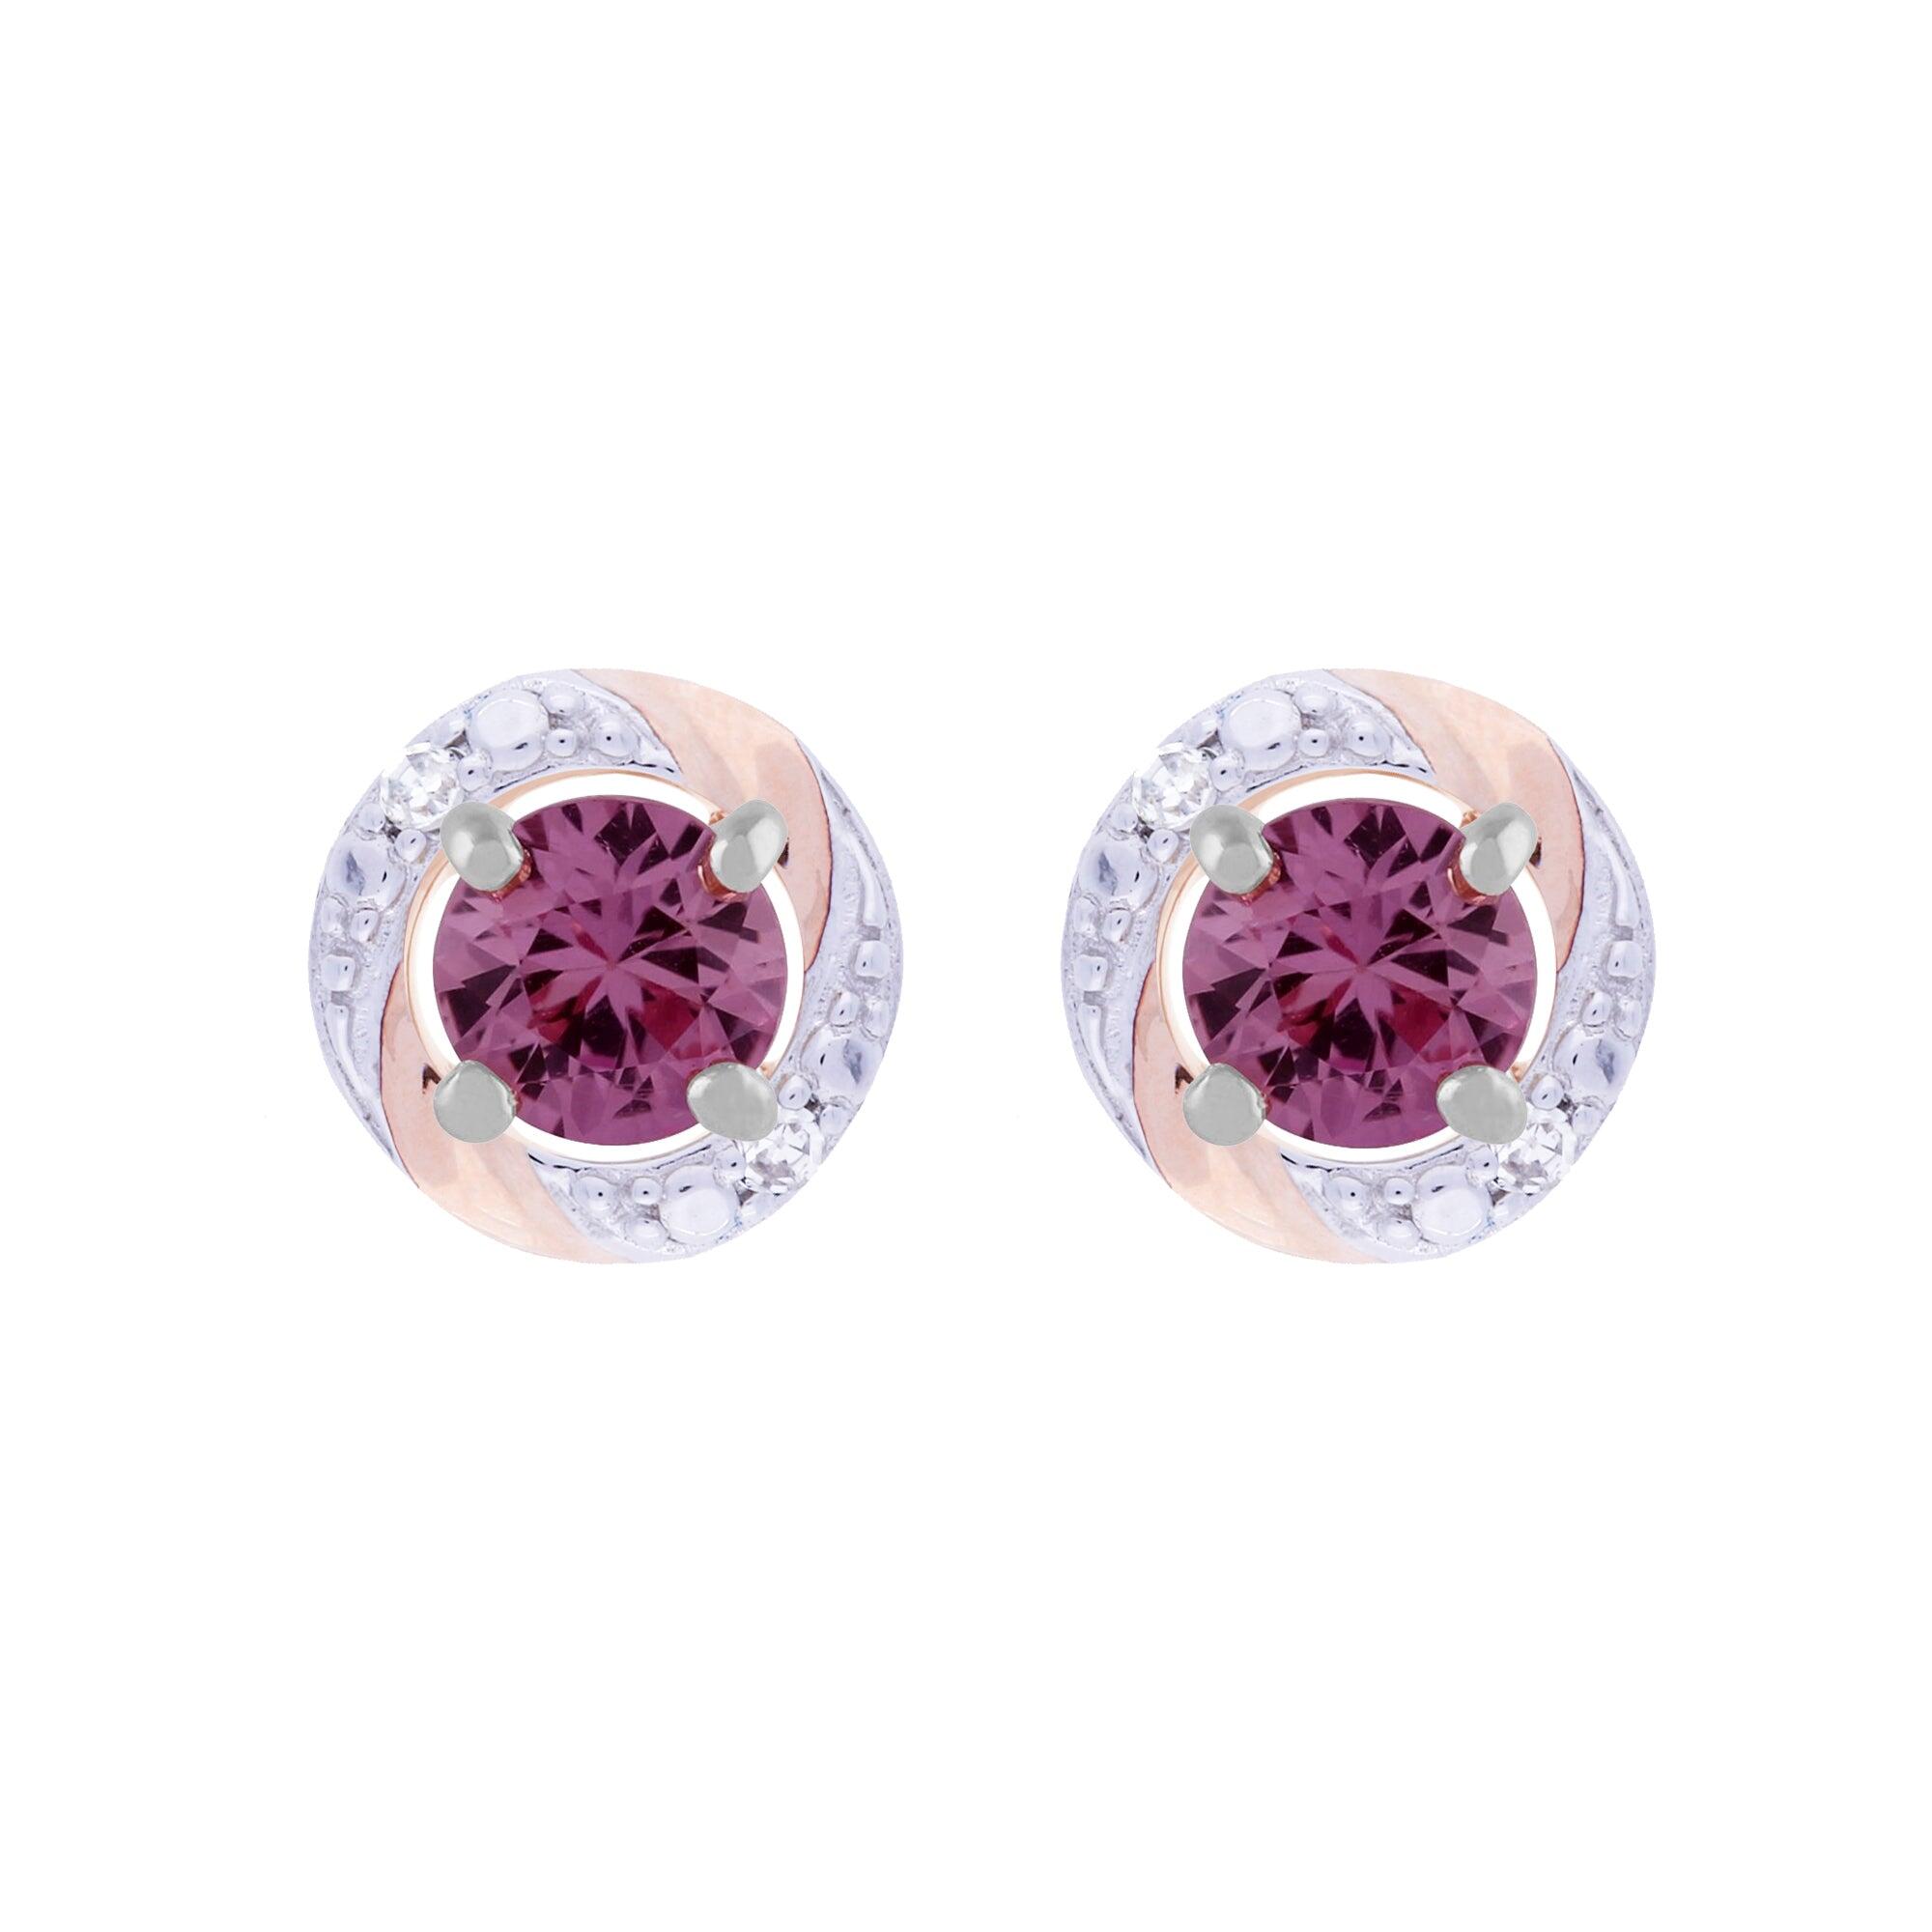 Classic Round Pink Sapphire Stud Earrings with Detachable Diamond Round Earrings Jacket Set in 9ct White Gold